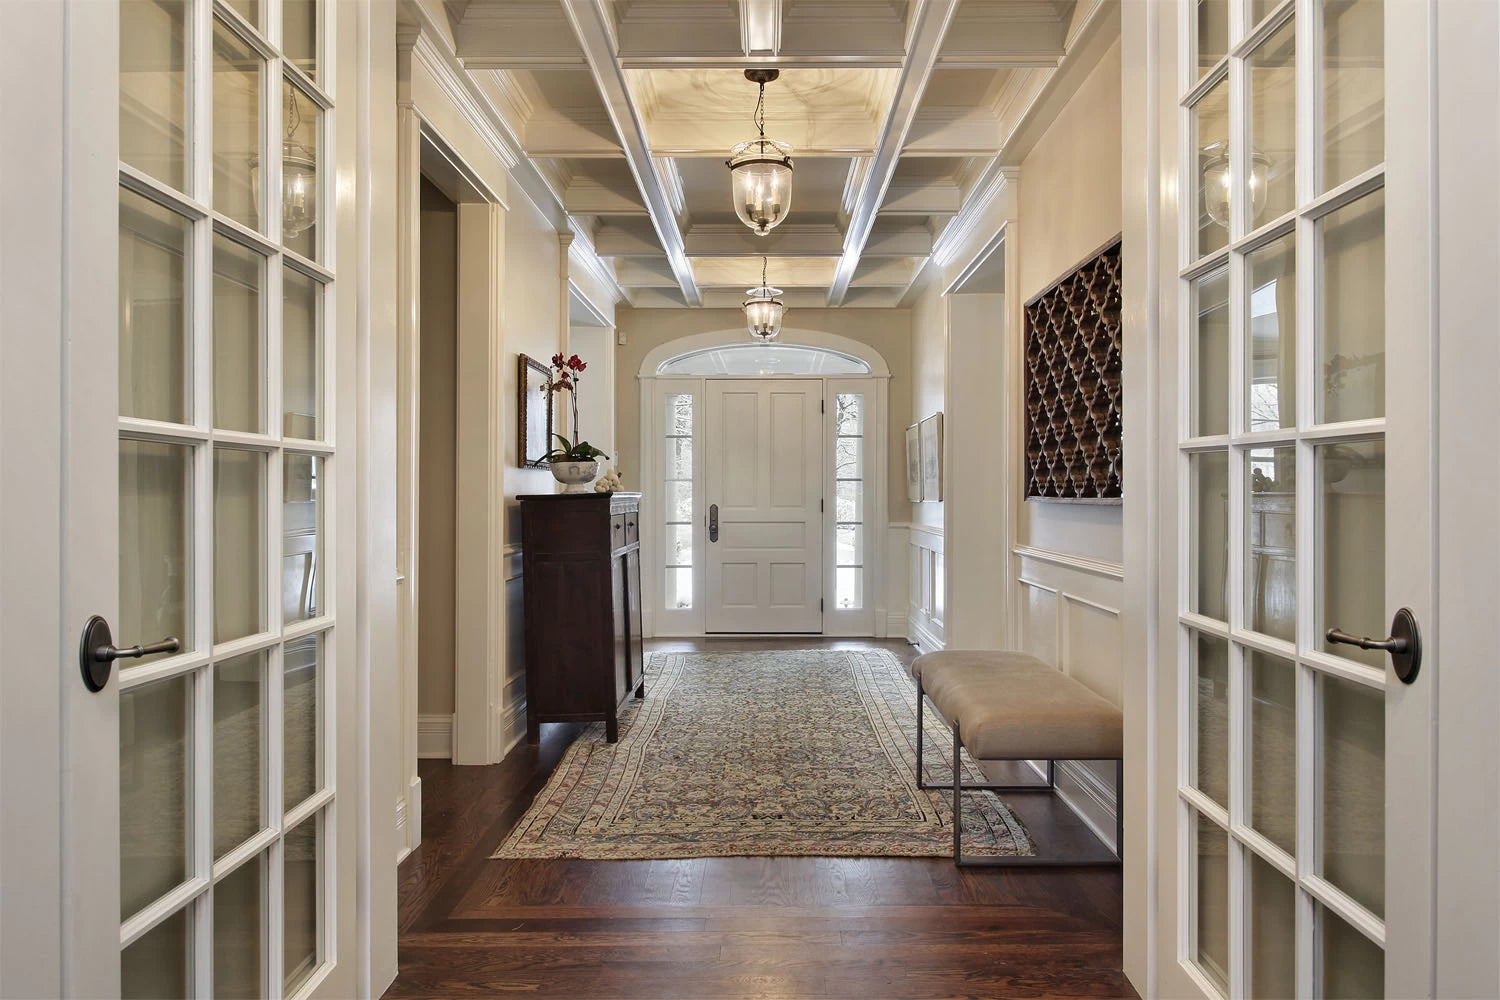 6 ways to decorate the foyer